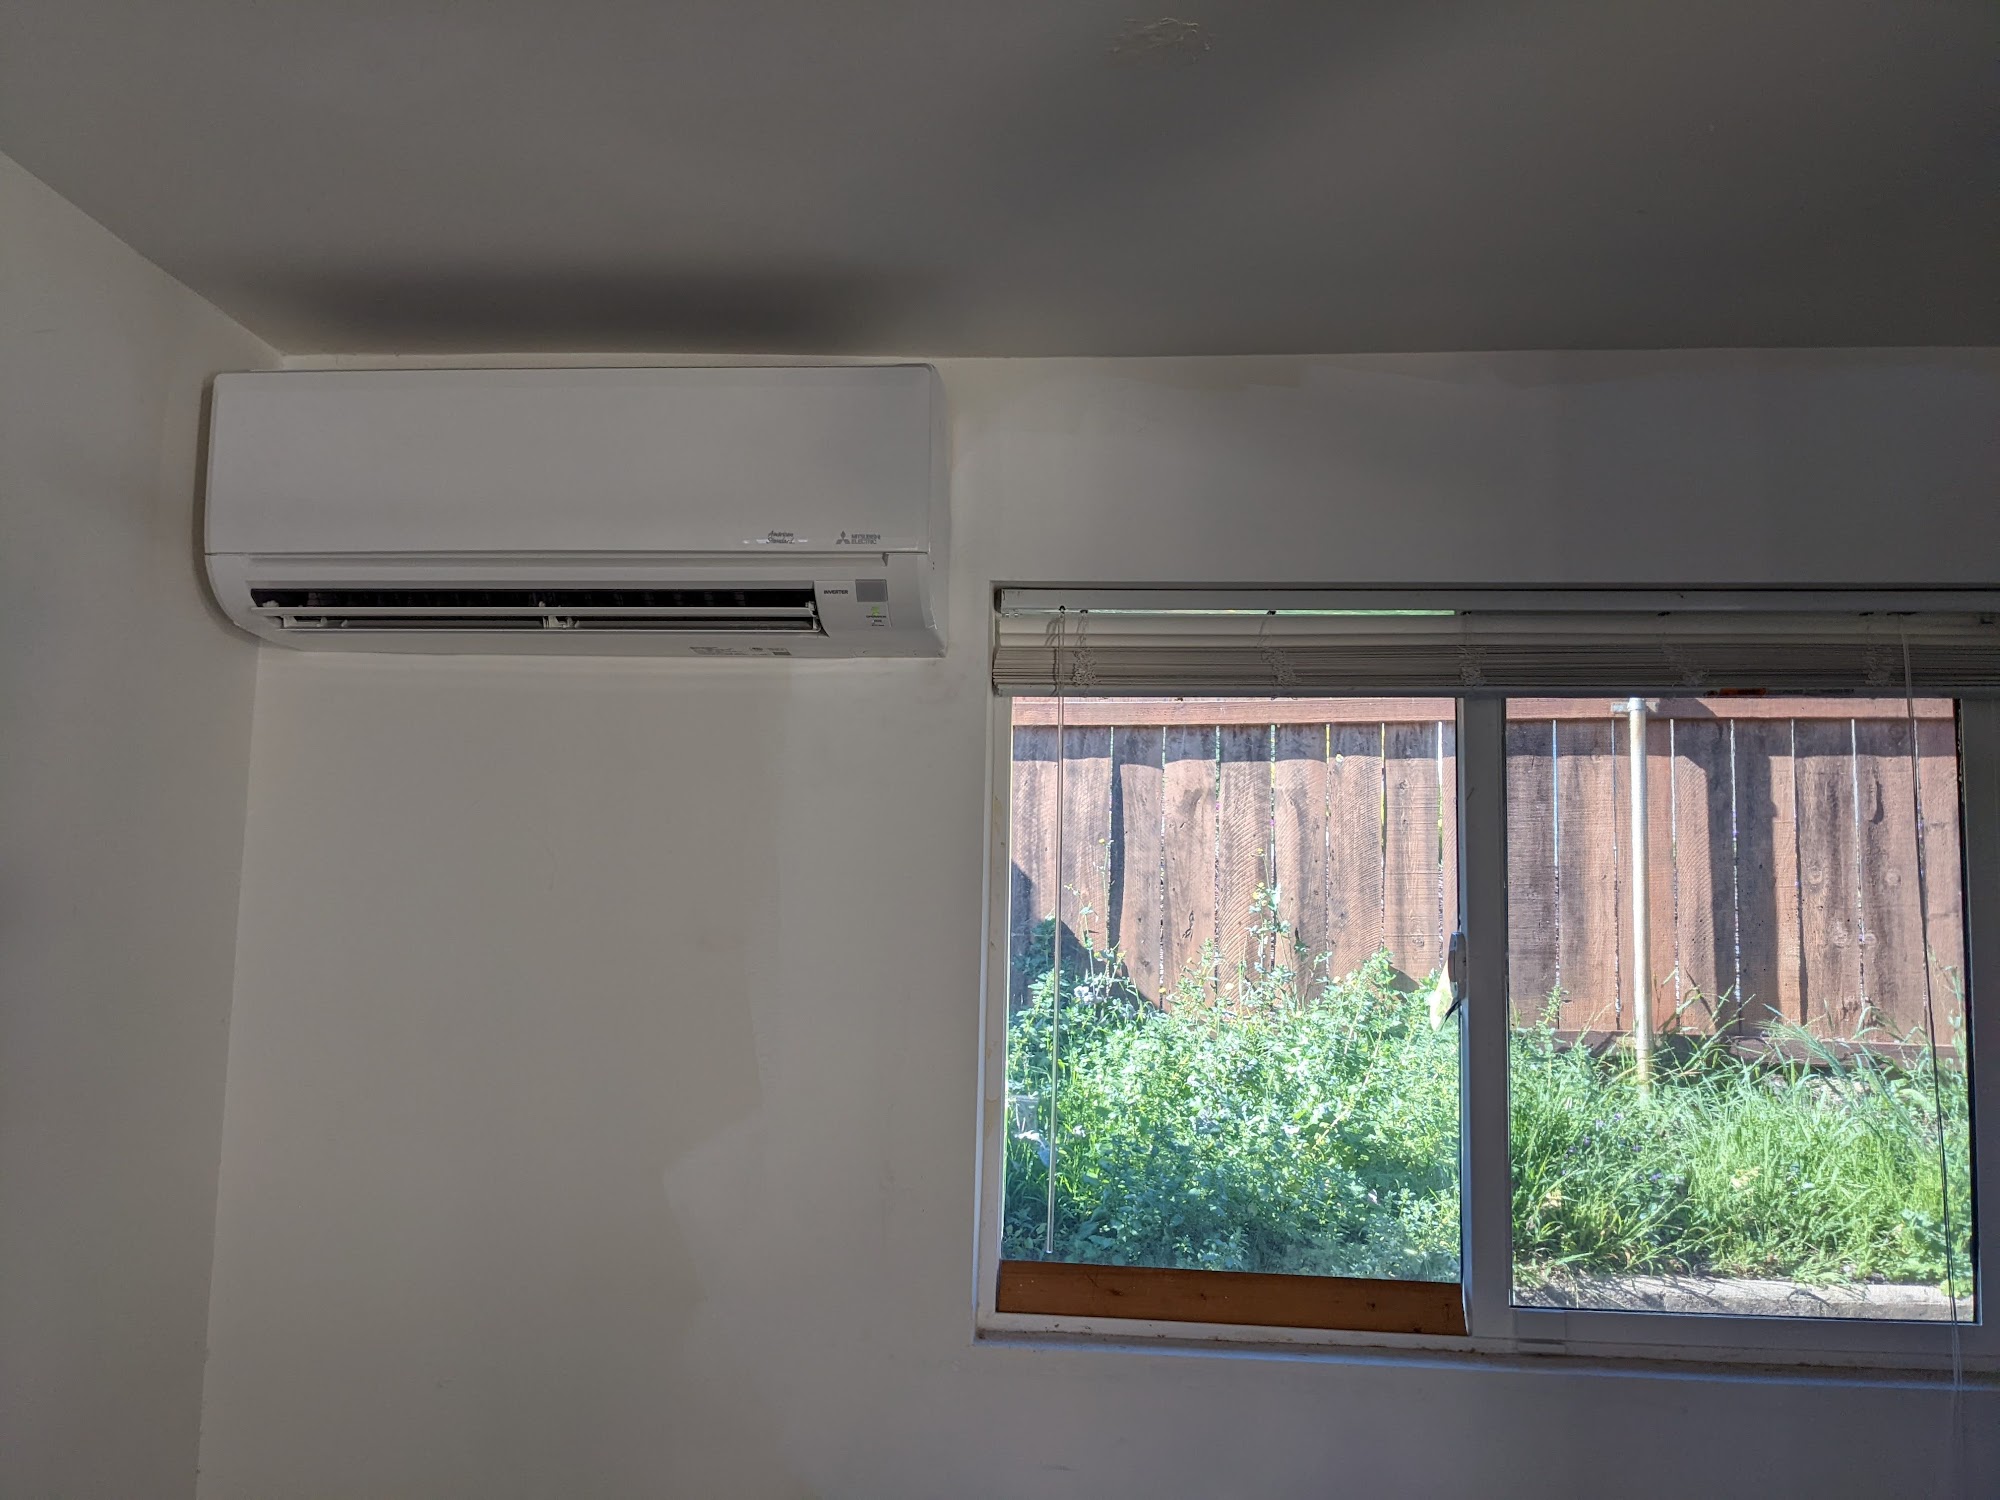 Accord Air - Ductless Mini-Split Installation & Maintenance Services